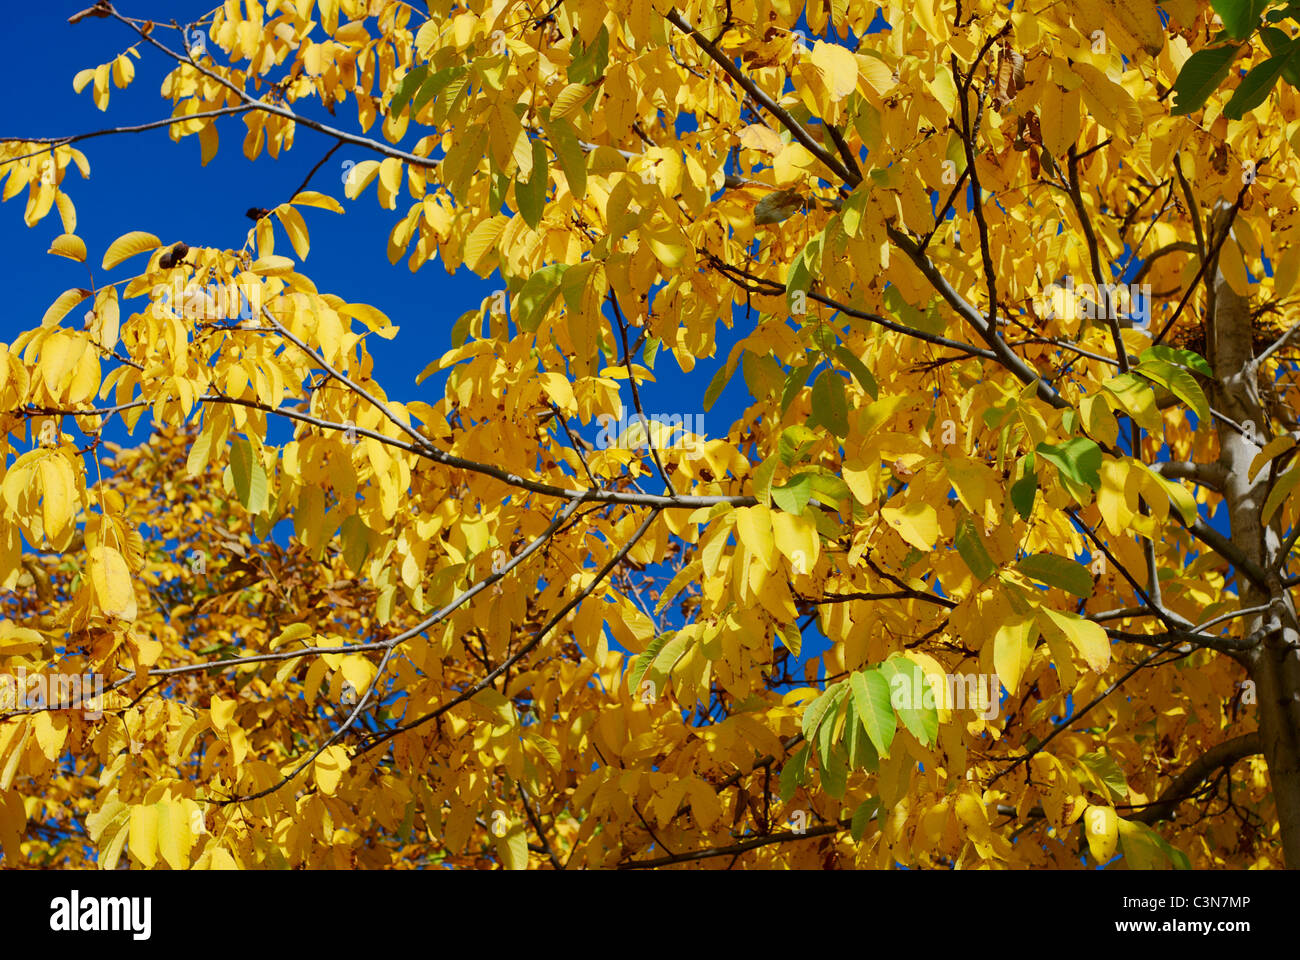 detail of a yellow walnut tree in autumn Stock Photo